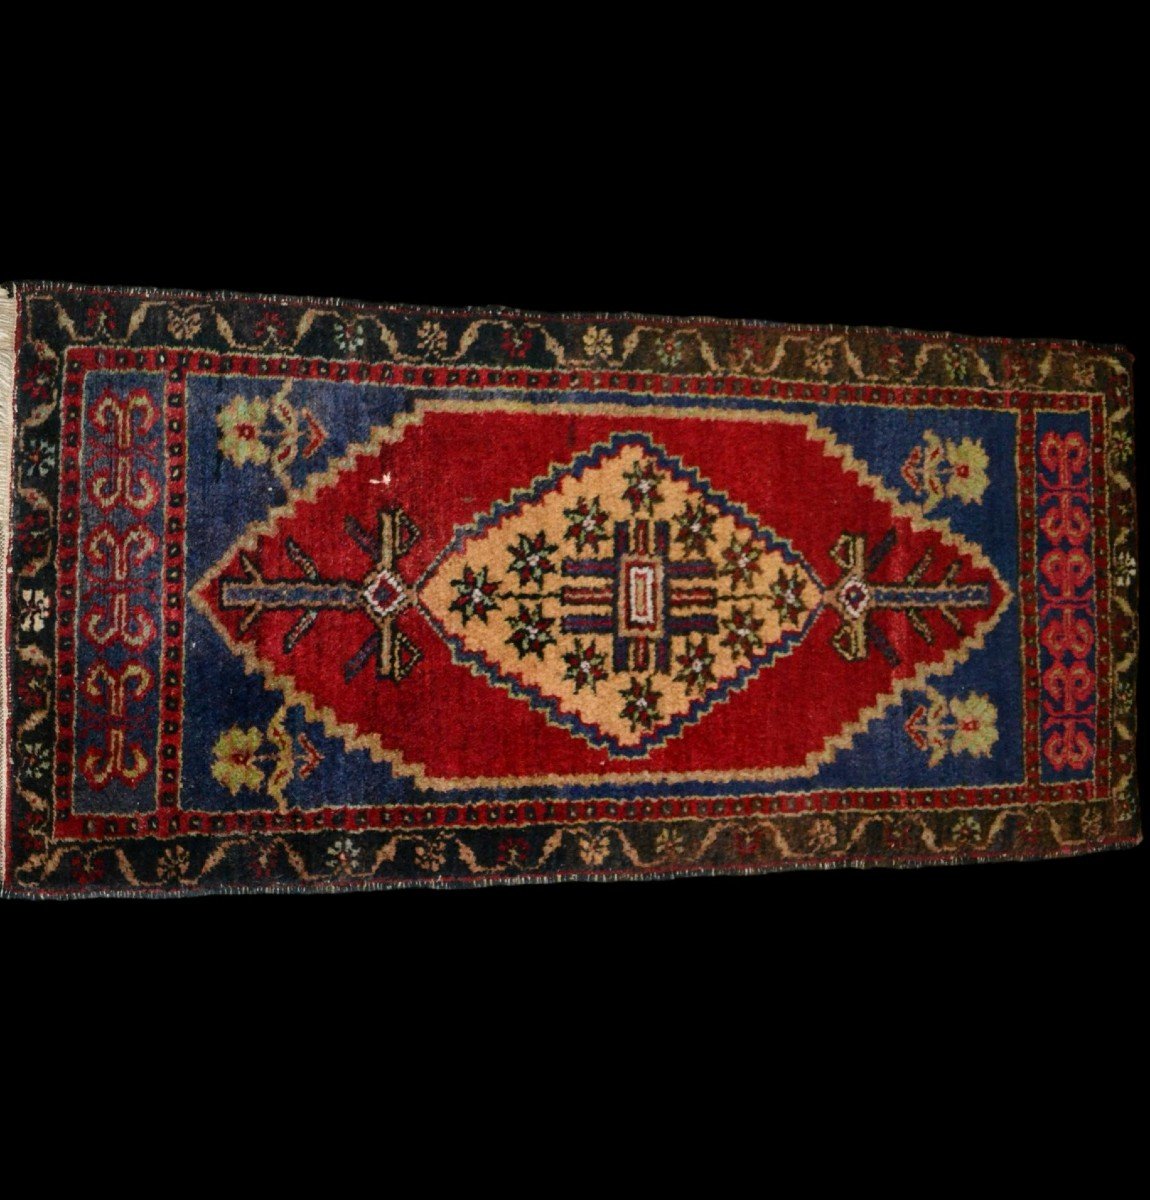 Yastik Around 1950, 51 Cm X 109 Cm, Hand-knotted Wool In Turkey, Welcome Mat, In Good Condition-photo-2